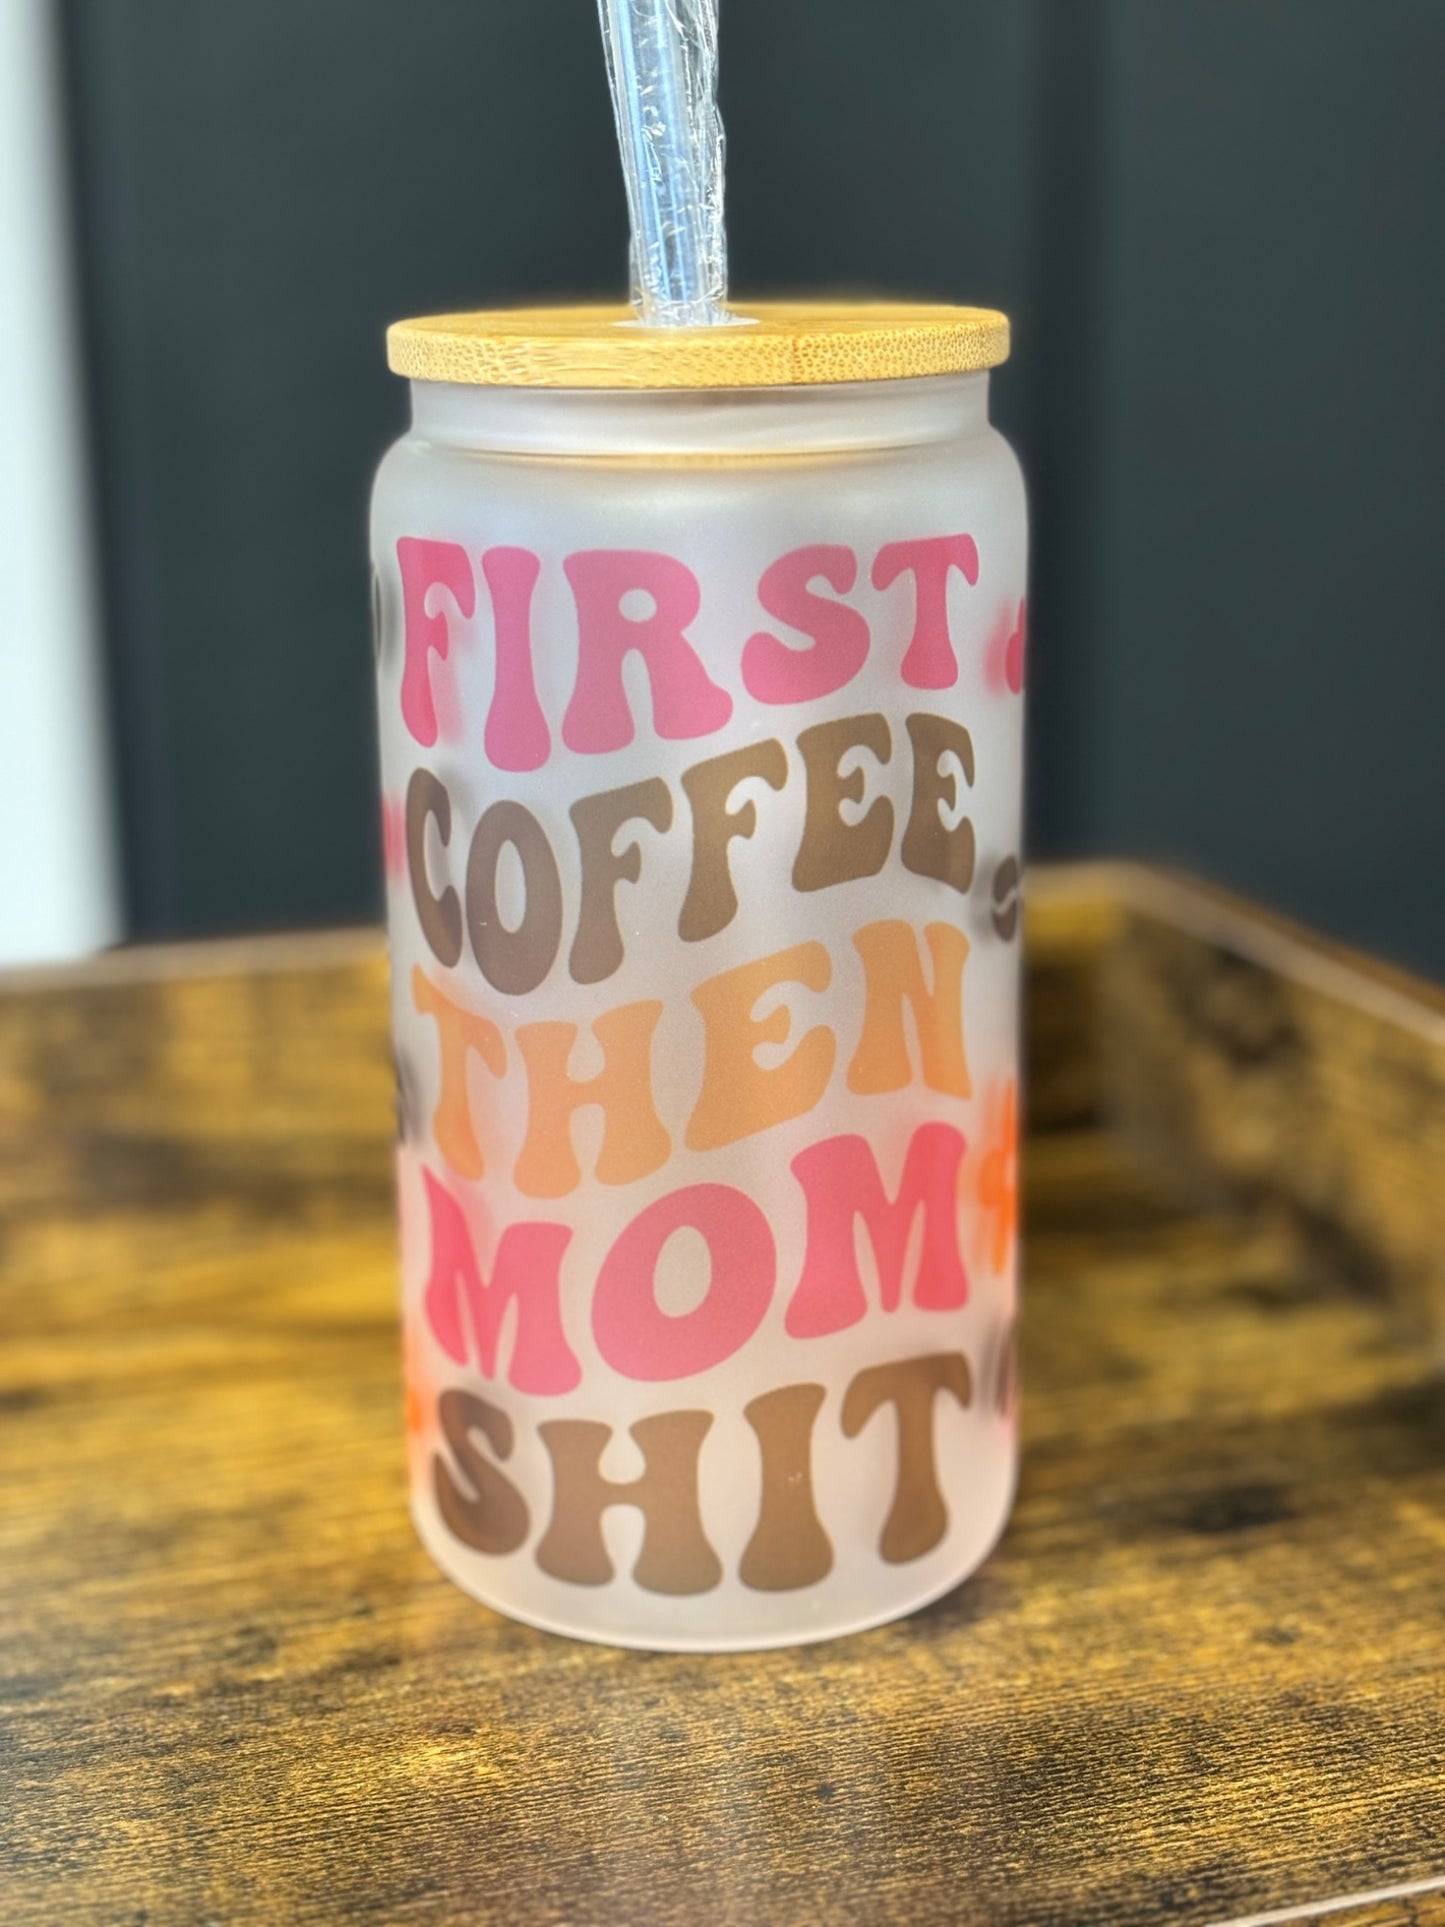 First Coffee Then Mom Sh*t Frosted Glass Can - 2